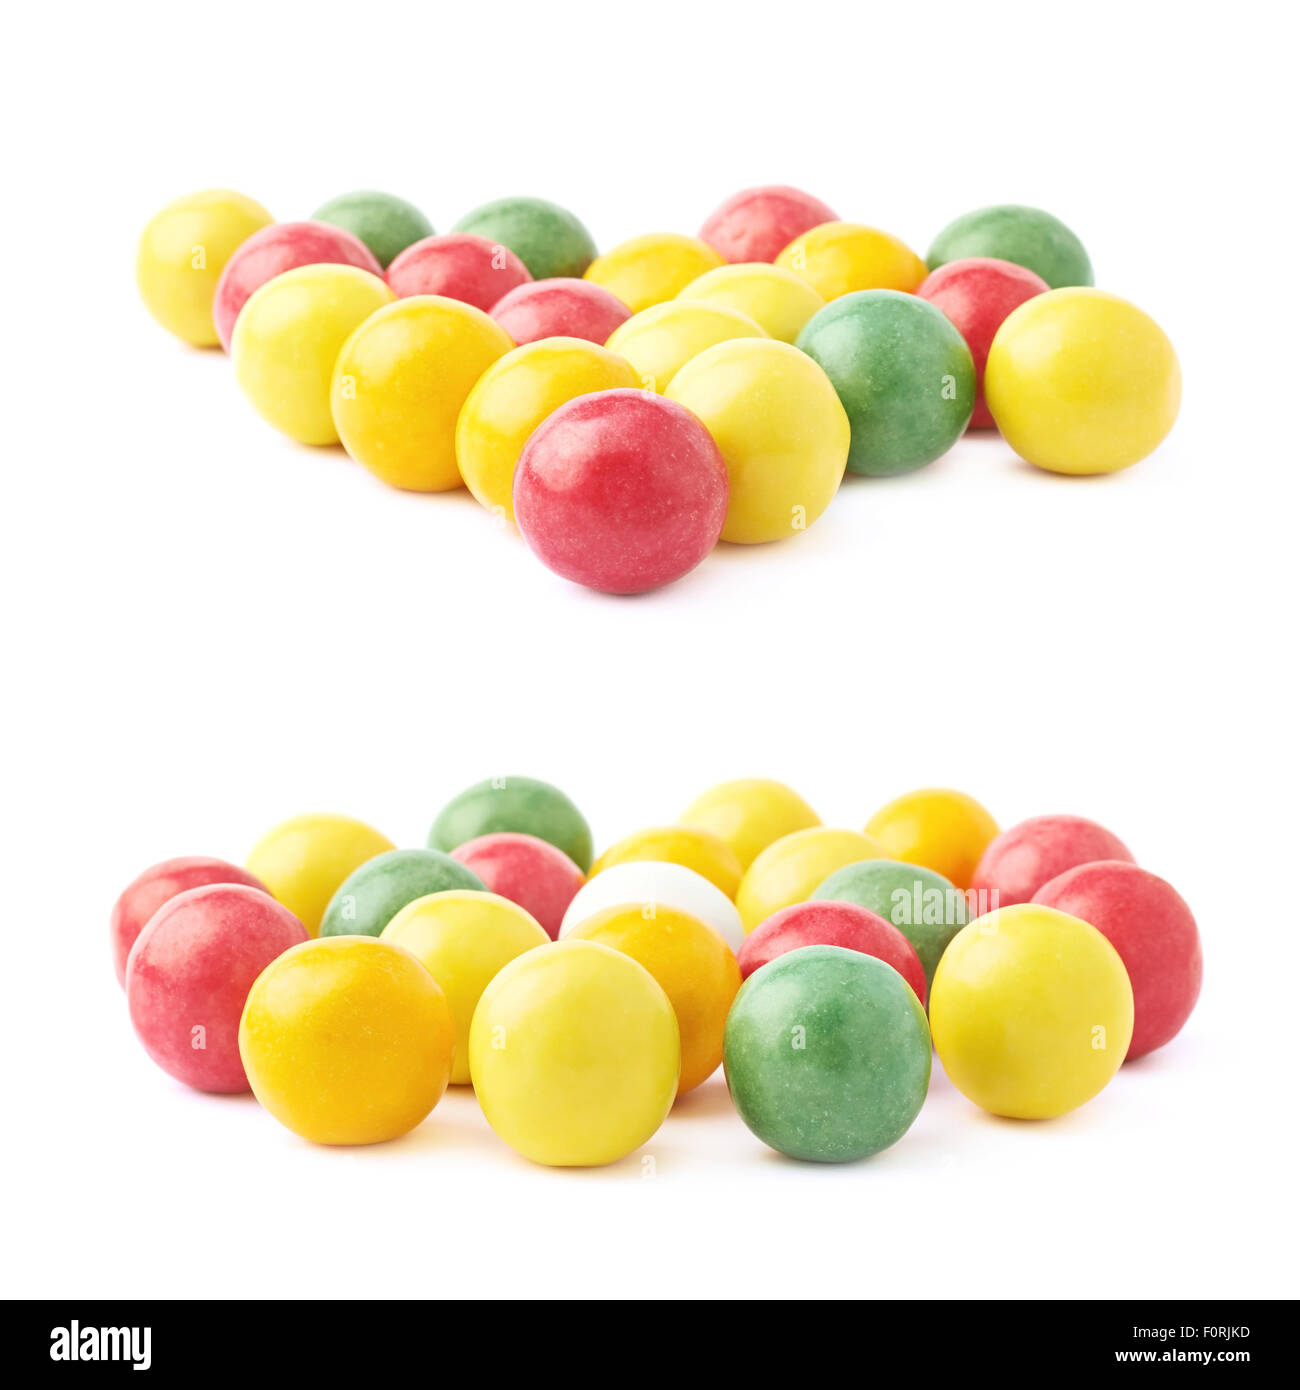 Multiple chewing gum balls isolated Stock Photo